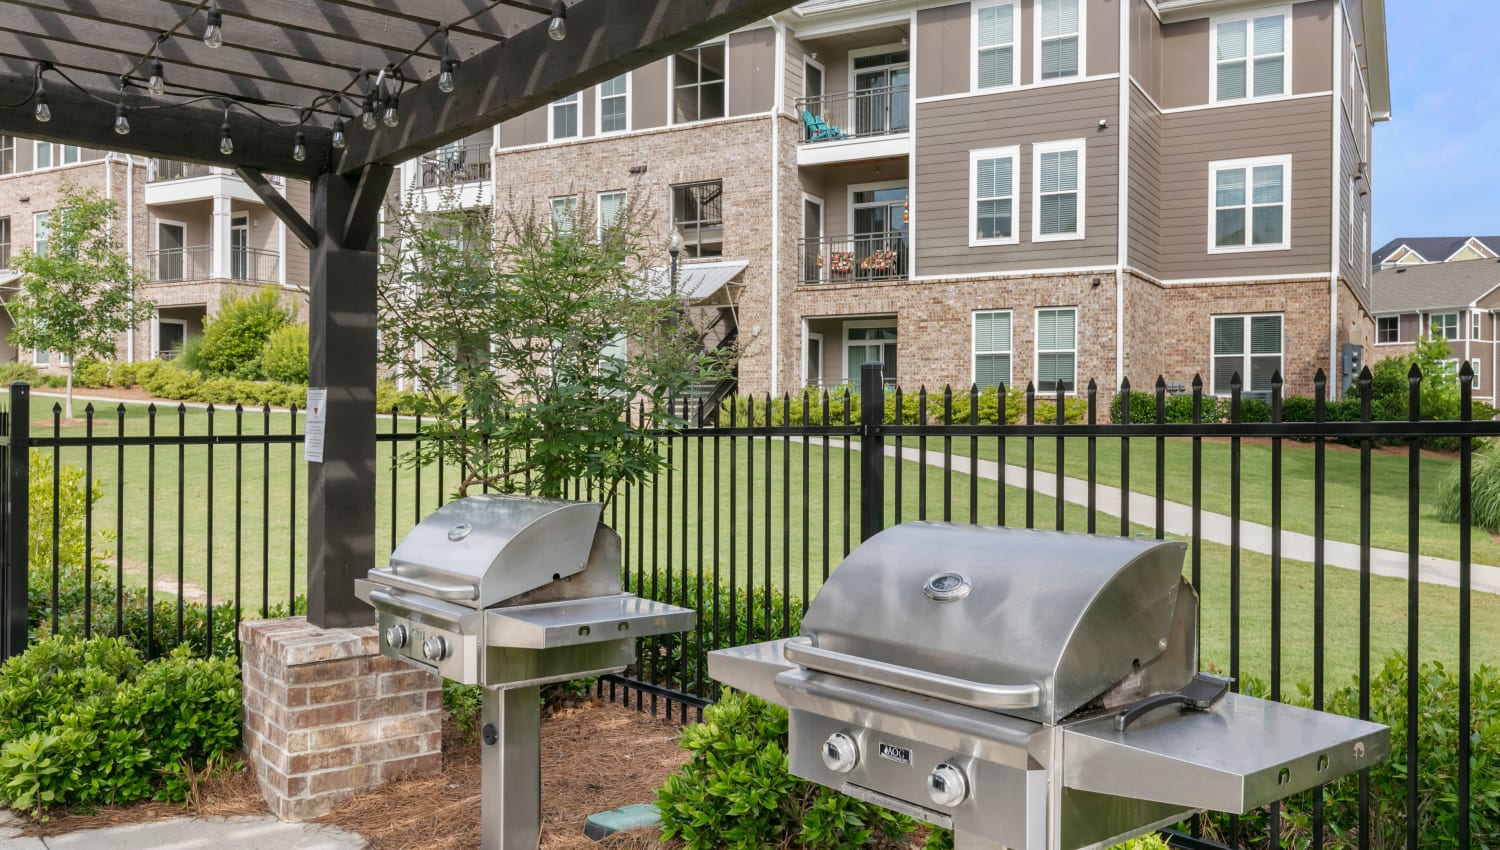 Barbecue grilling stations at The Village at Apison Pike in Ooltewah, Tennessee